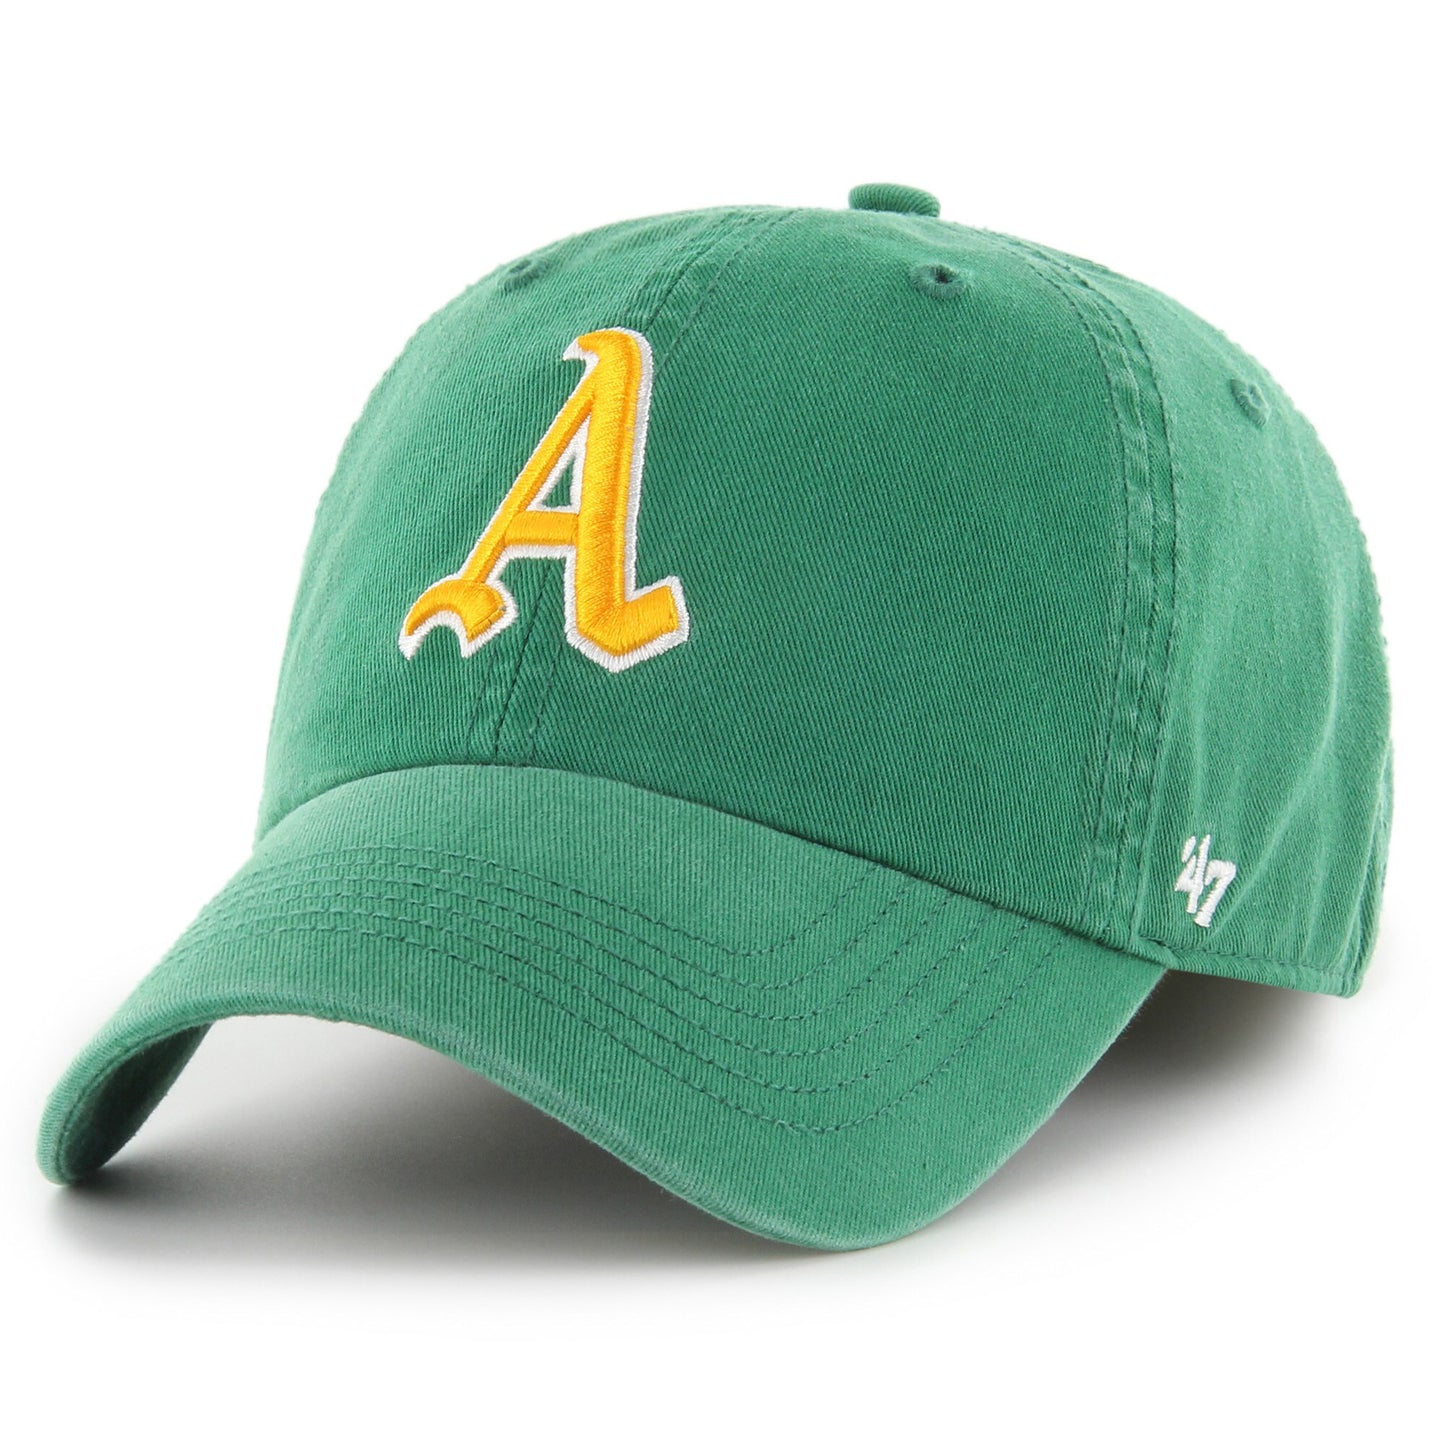 Oakland Athletics '47 Cooperstown Collection Franchise Fitted Hat - Green